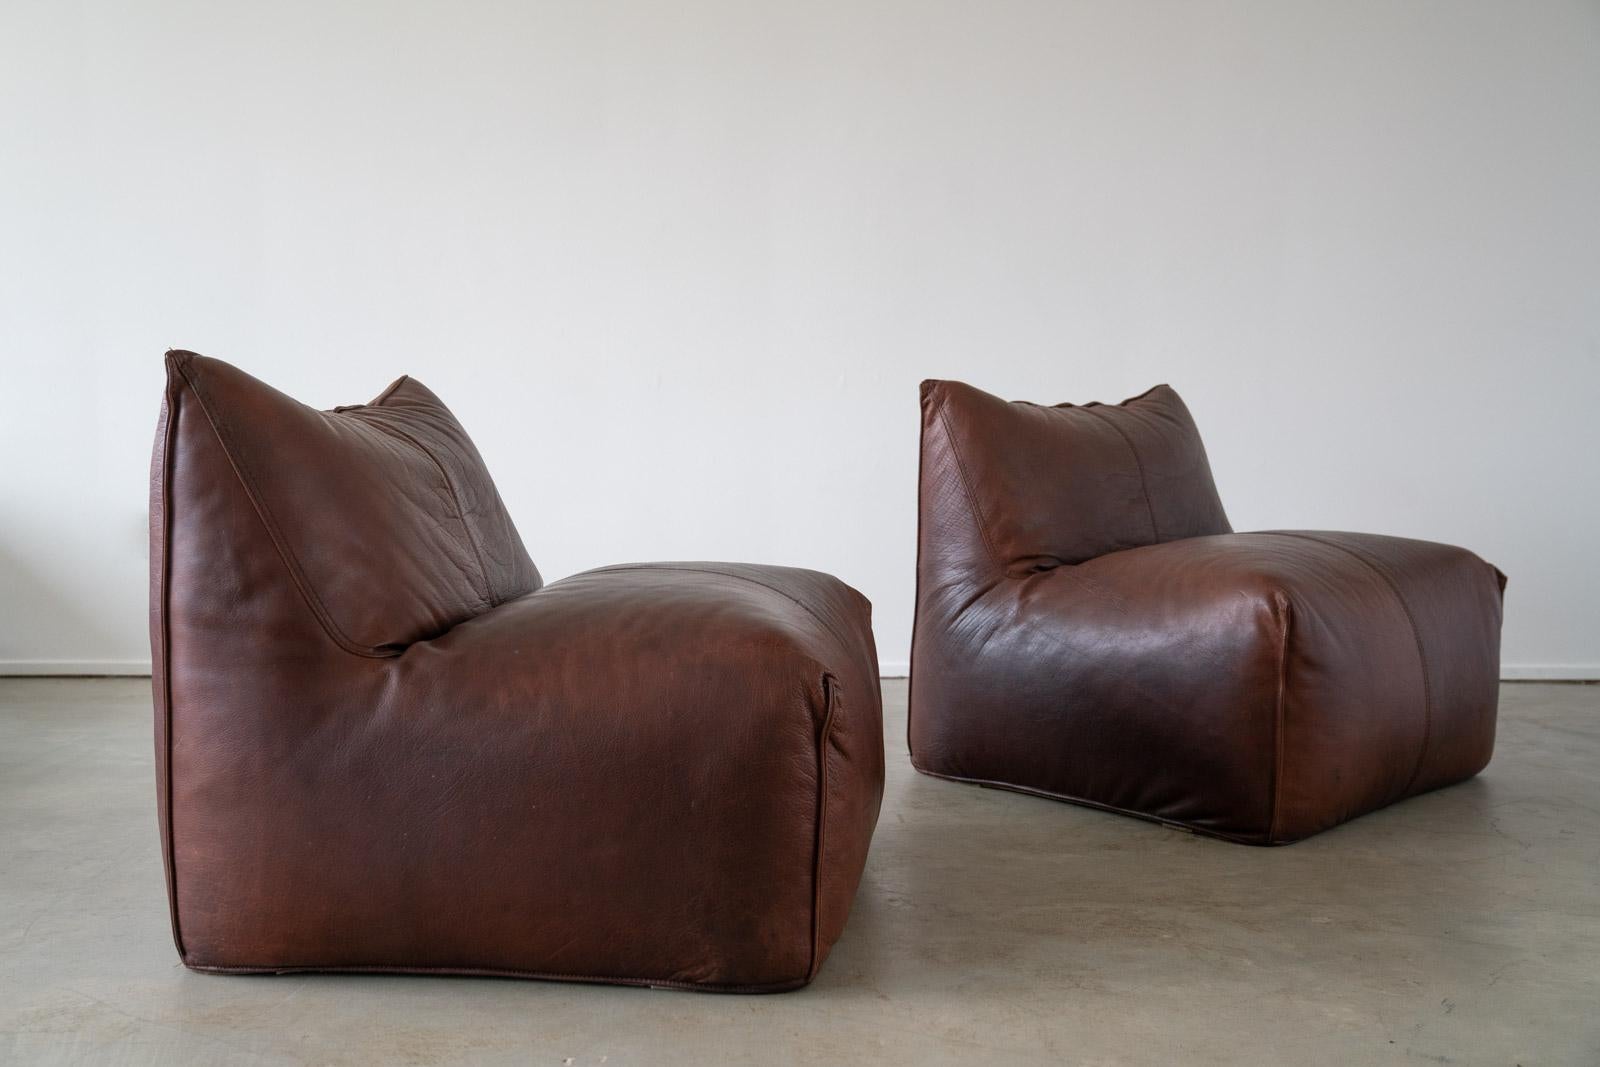 Pair of modular chairs from the 